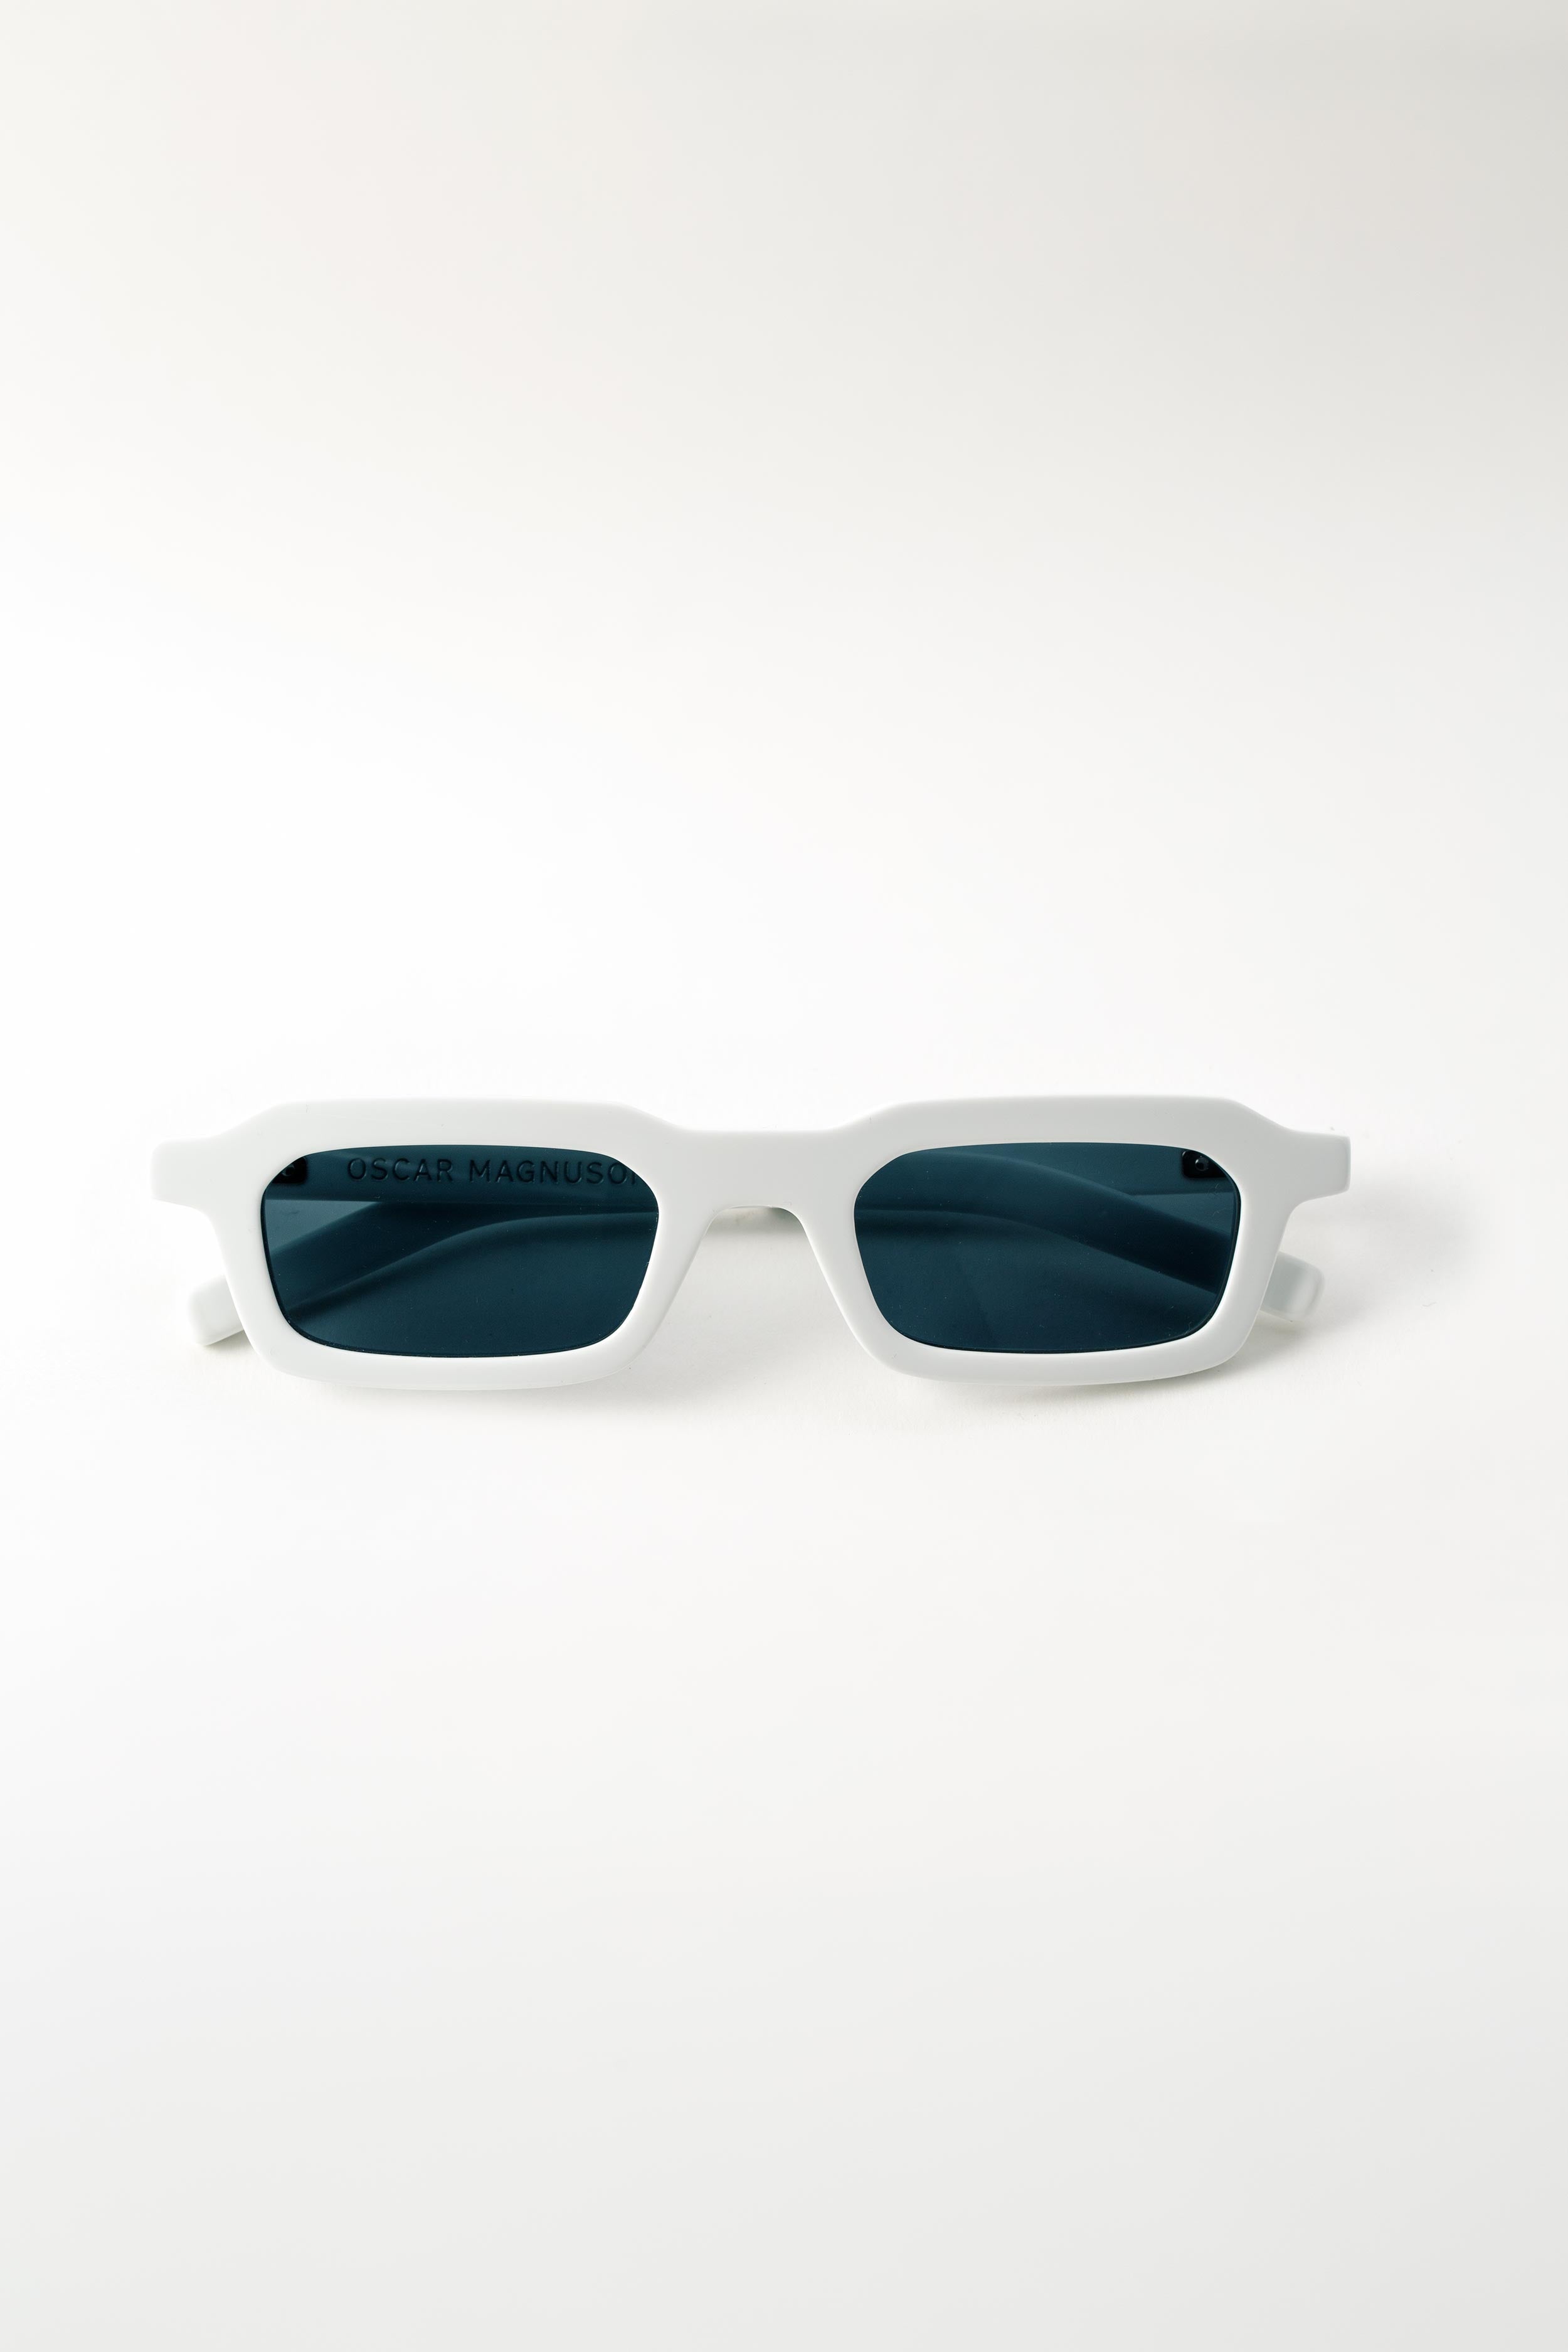 slette legering mus Oscar Magnuson "Sid" sunglasses from the OM.3 collection – Oscar Magnuson  Spectacles